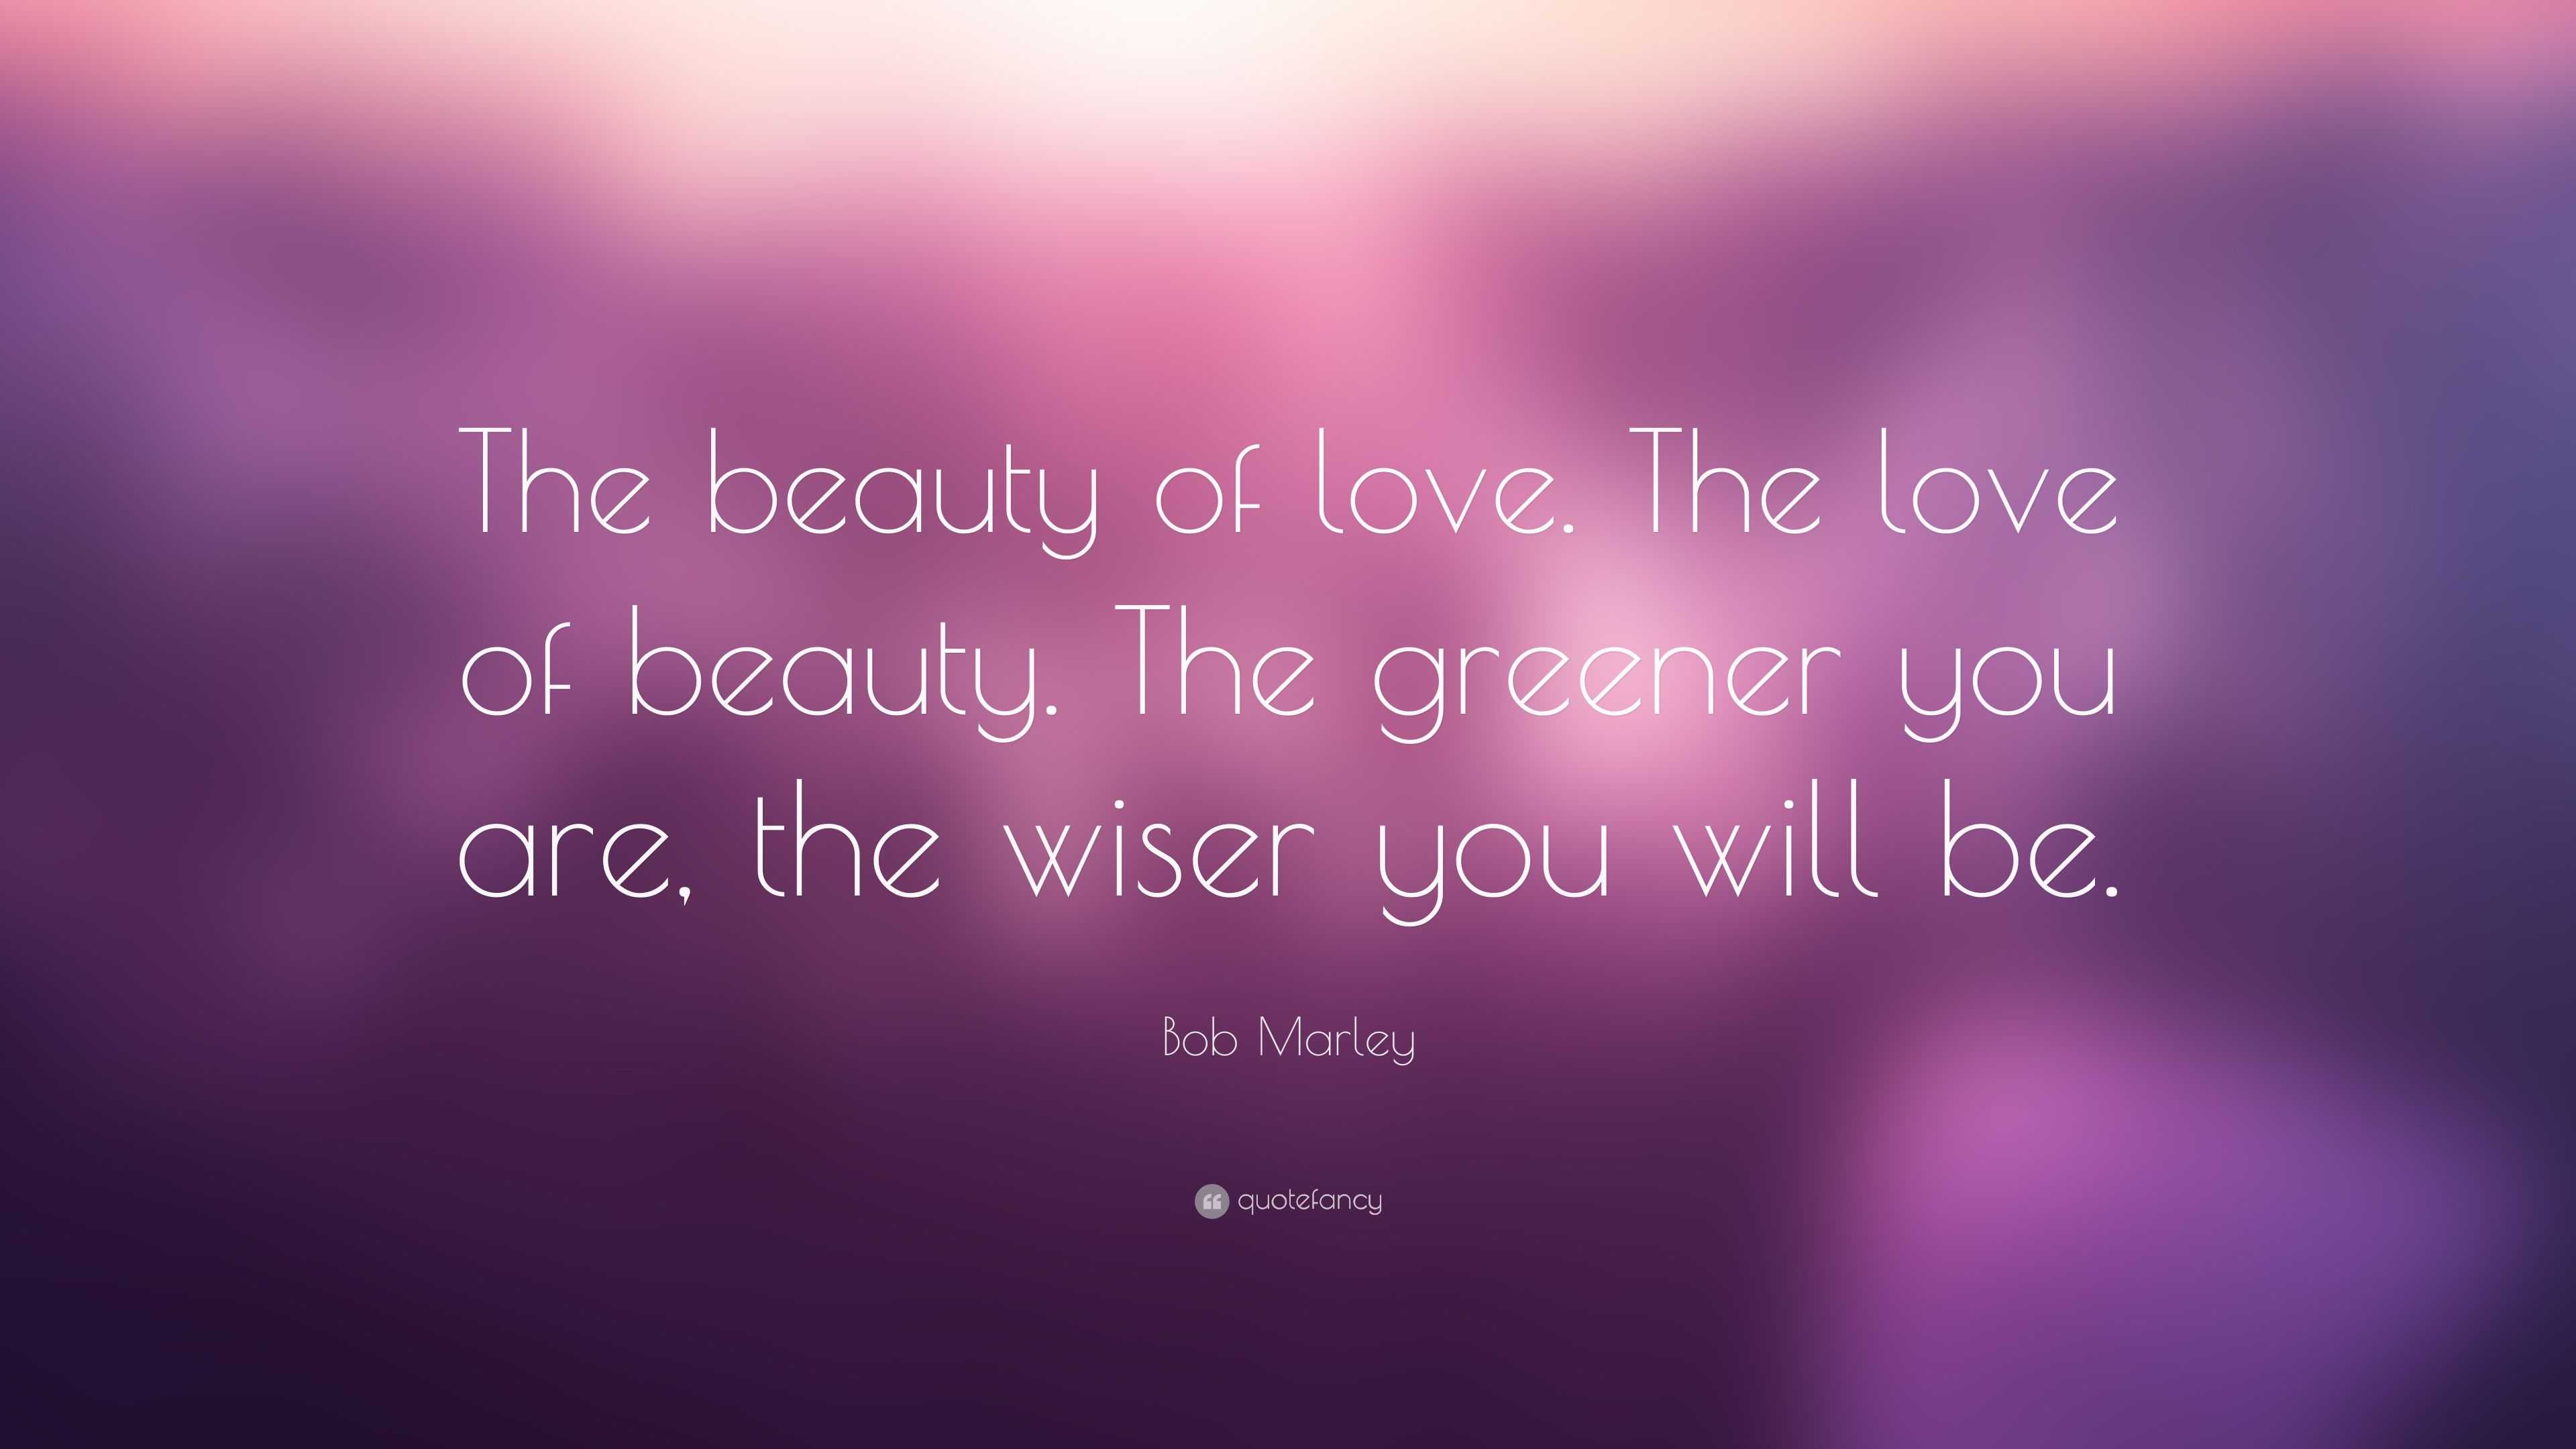 Bob Marley Quote “The beauty of love The love of beauty The